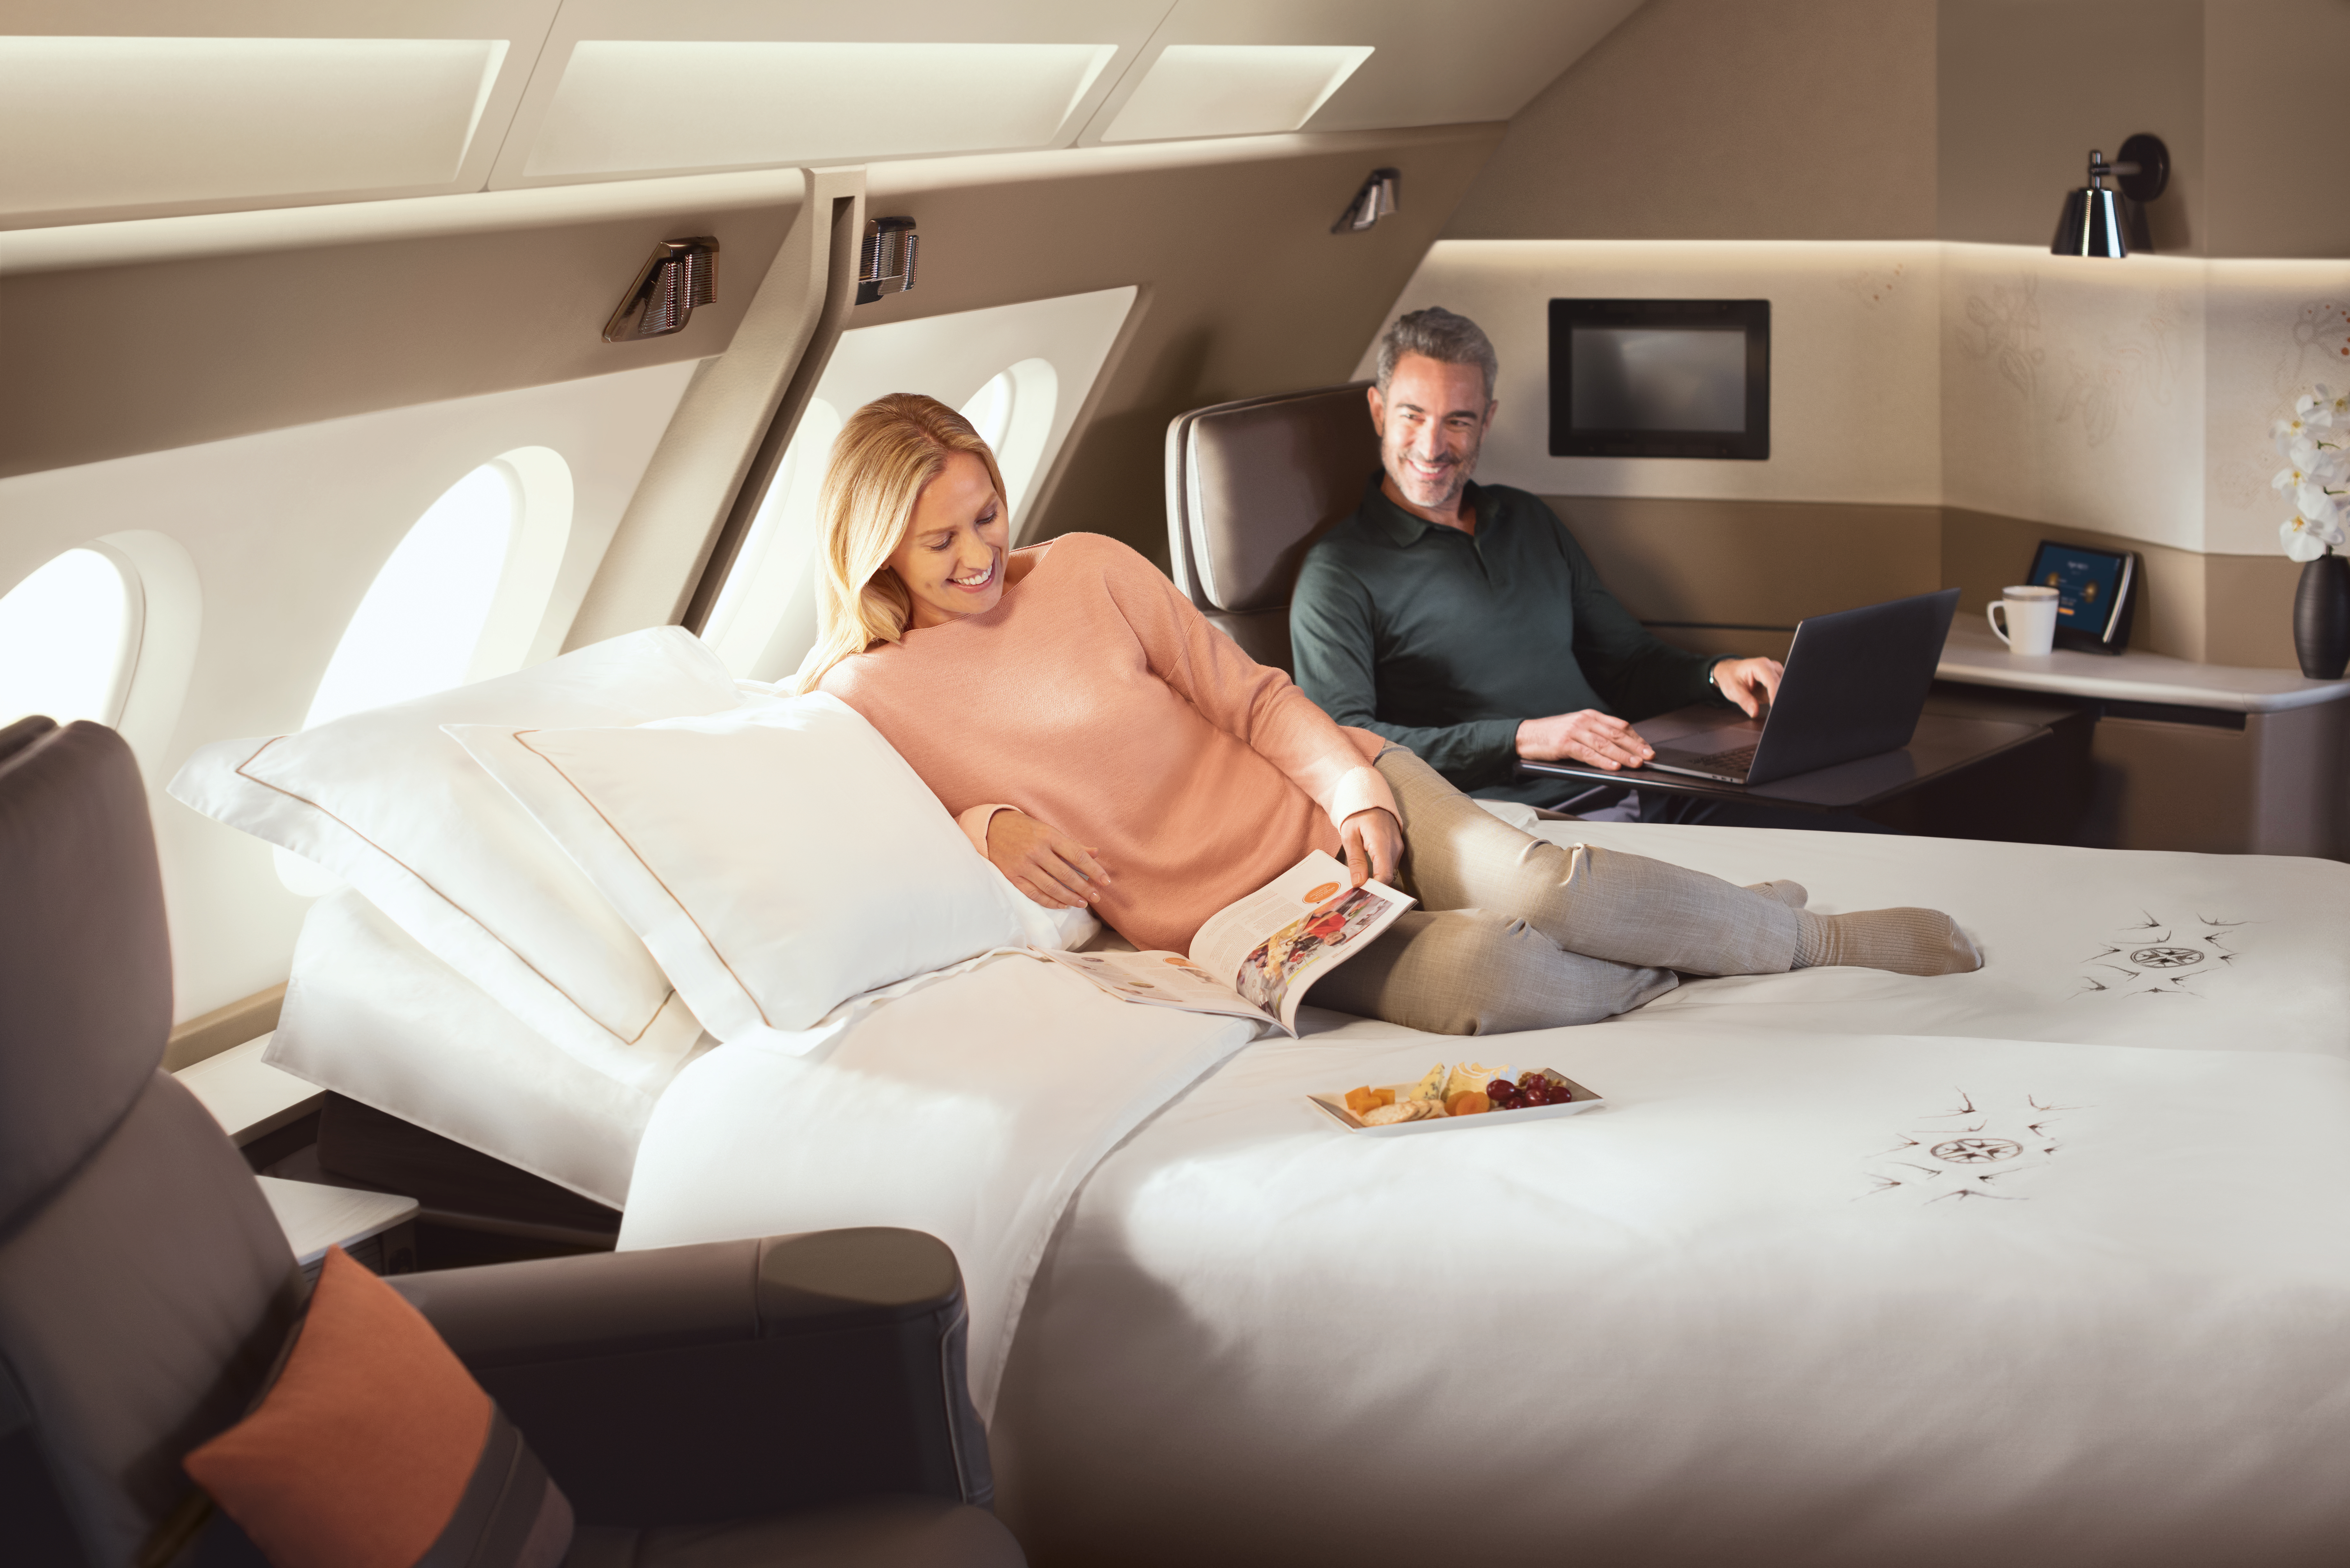 This Airline Just Rolled out New Luxury Suites with Full-Size Beds. Take a Look Inside